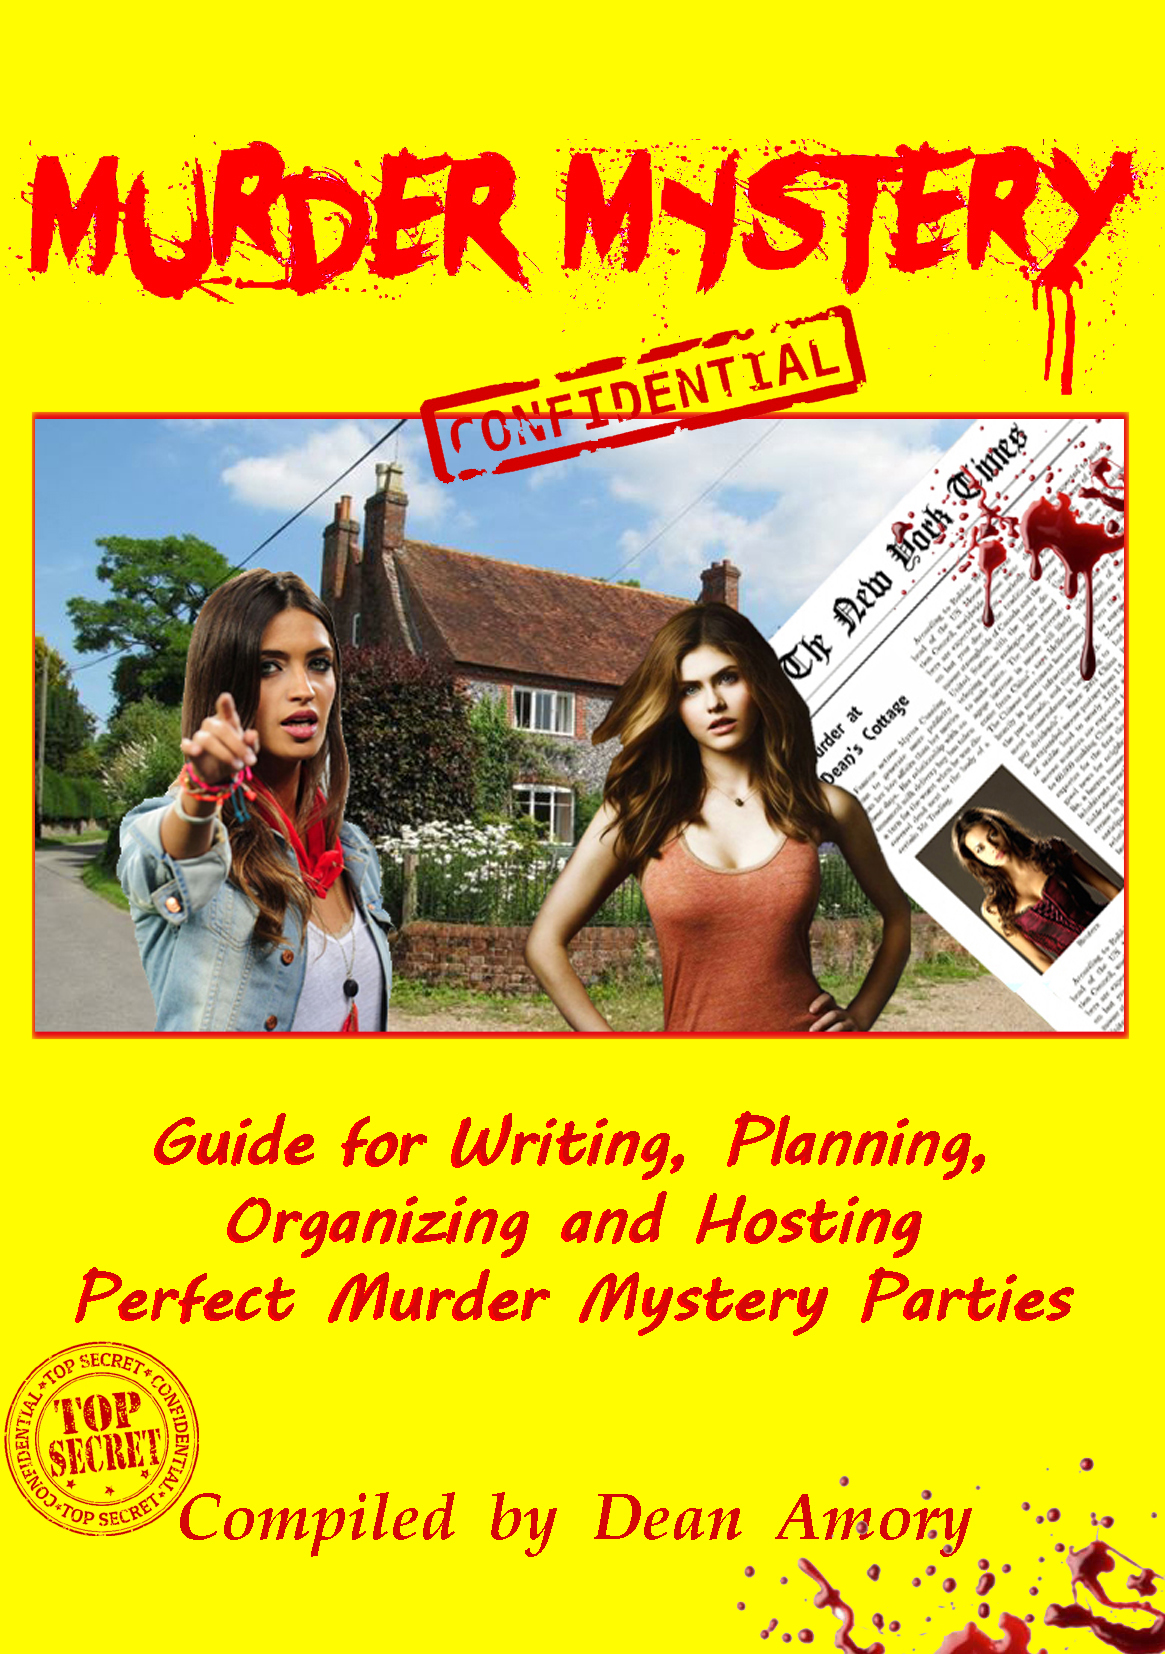 murder mystery party – HOW TO WRITE, ORGANIZE AND HOST THE PERFECT